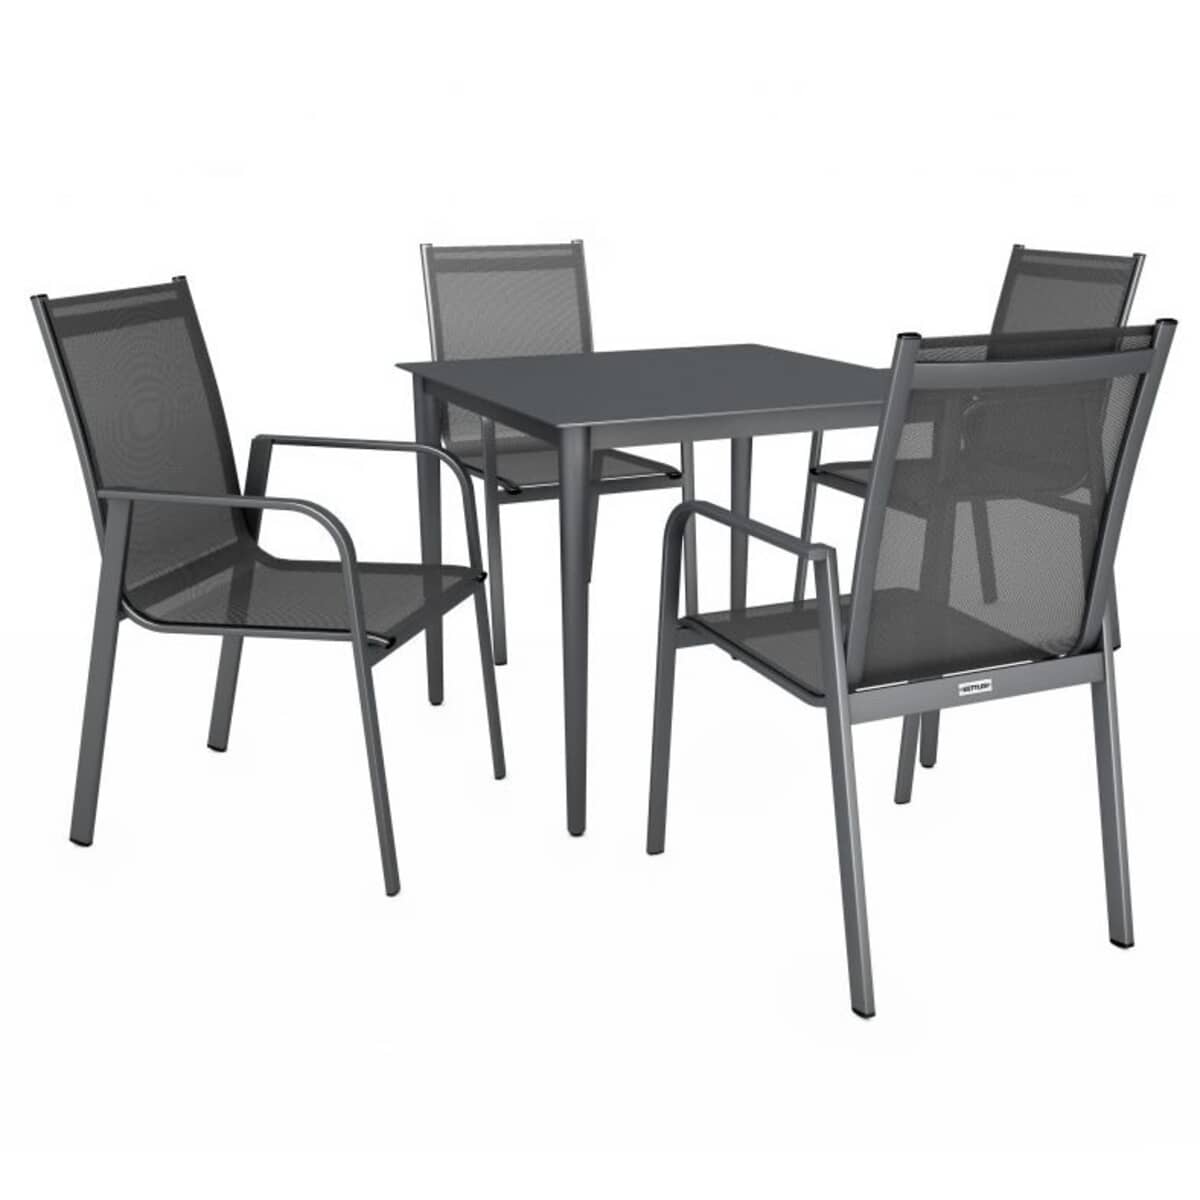 Kettler Surf - 4 Seat Set with Solid Aluminium Table Top and Stacking Armchairs